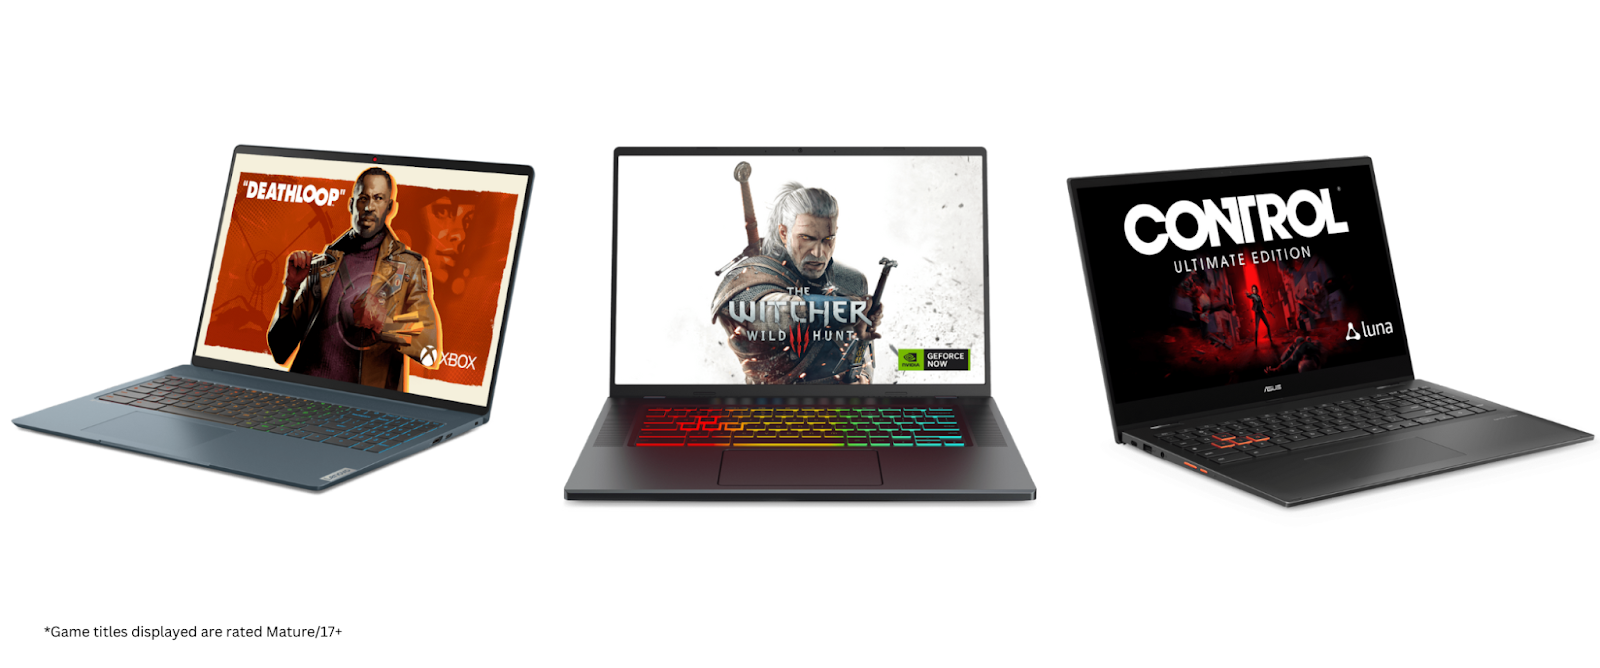 3 Chromebooks con juegos: Deathloop, The Witcher 3: Wild Hunt y Control Ultimate Edition.